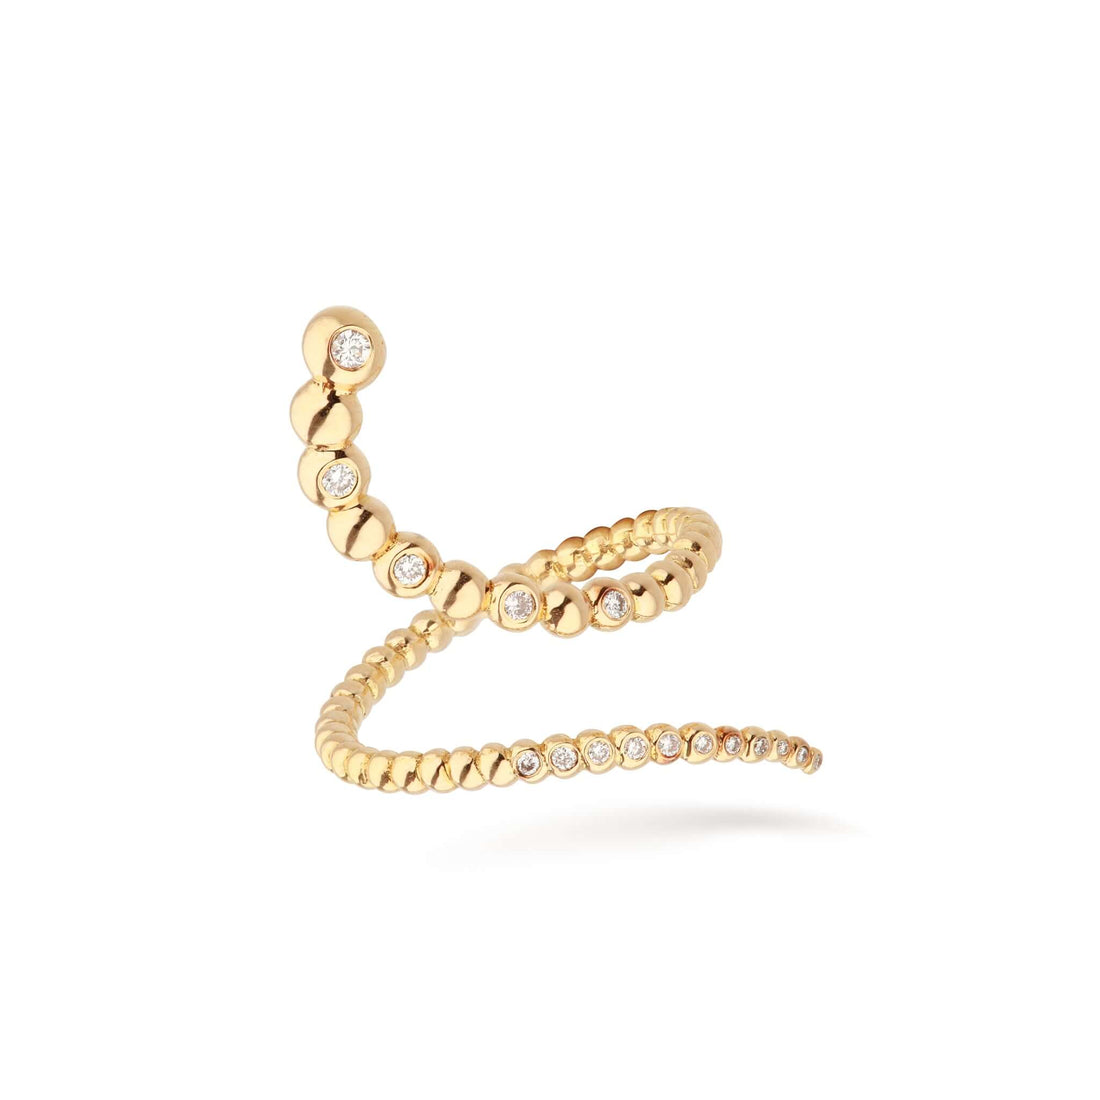 Jewelry Helix | Diamond Ring | 0.12 Cts. | 18K Gold - ring Zengoda Shop online from Artisan Brands